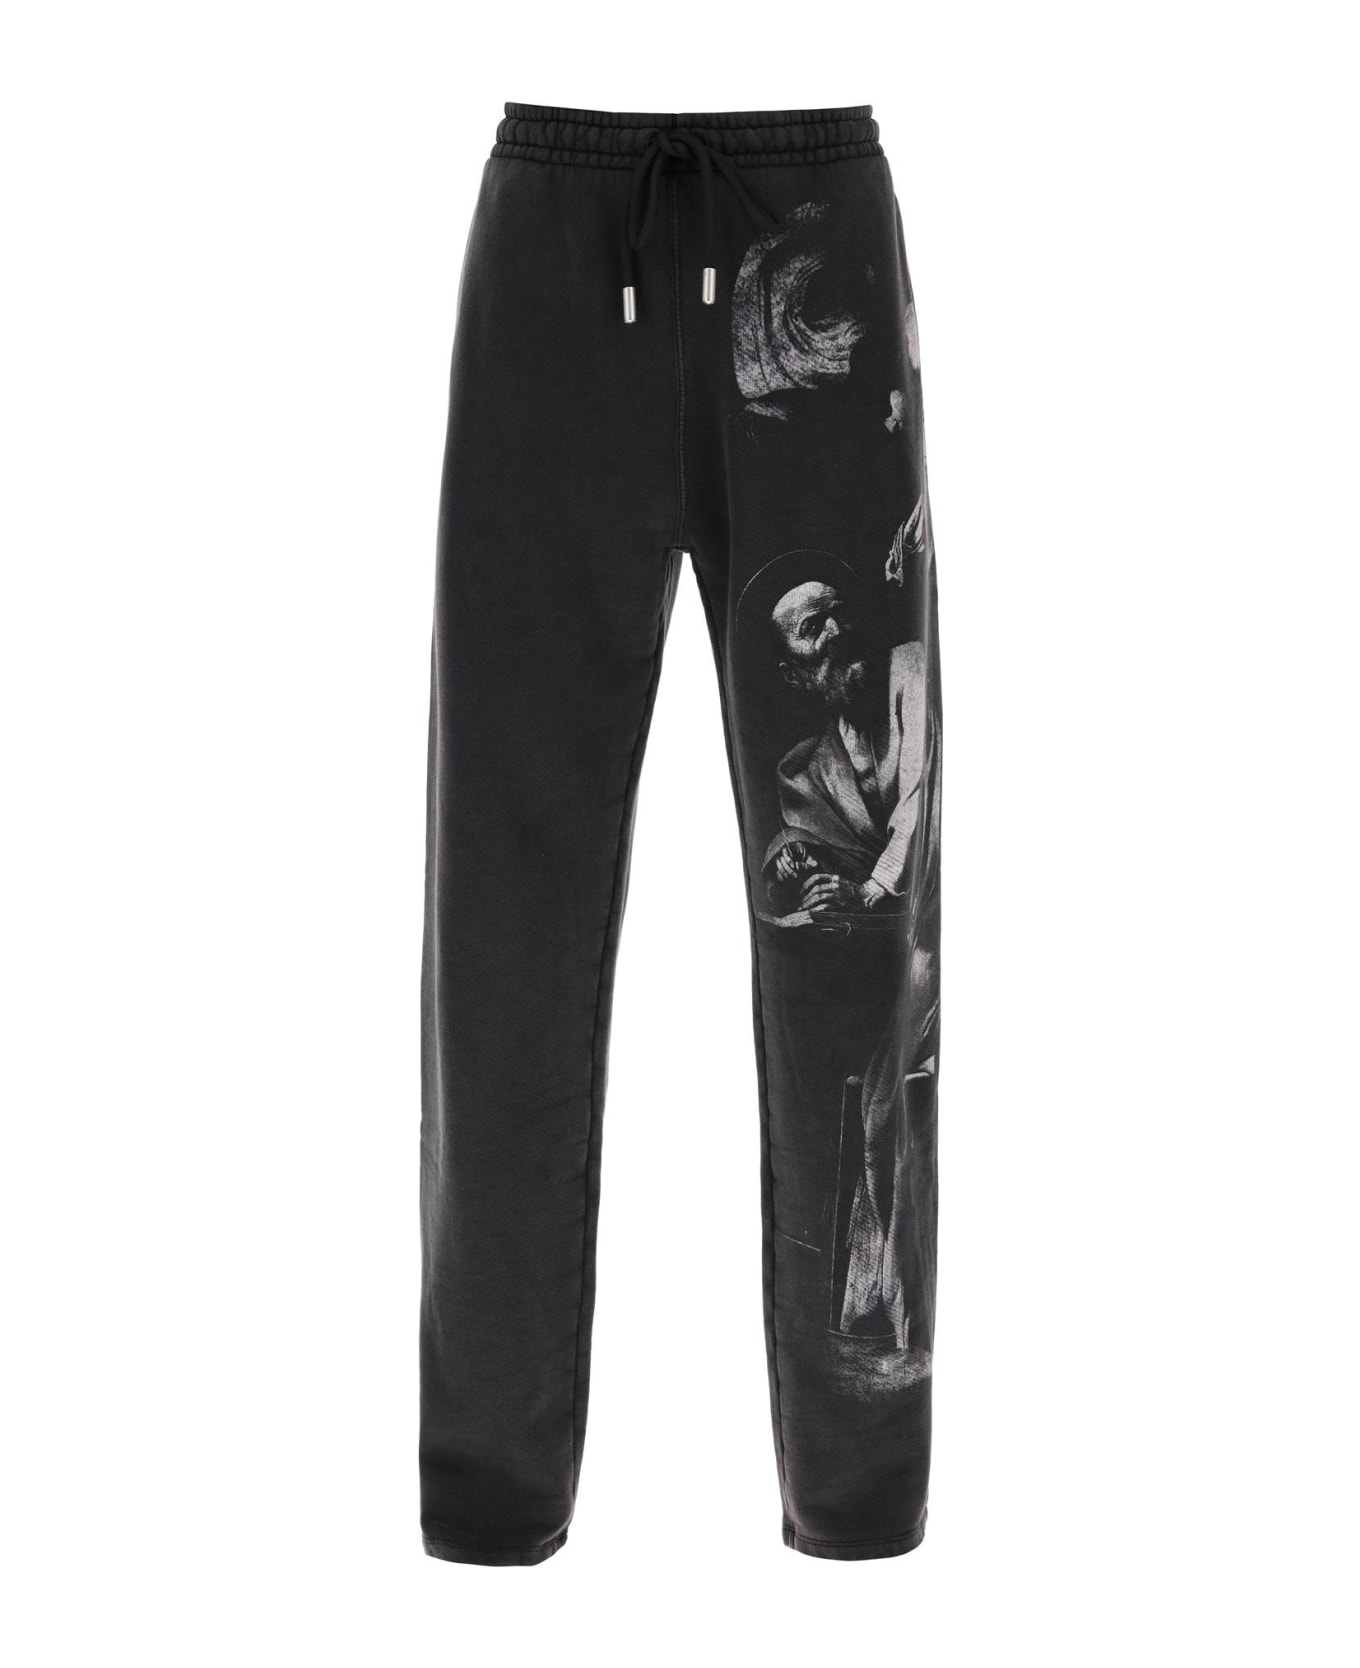 Off-White Pants With Drawstring And Graphic Print - BLACK GREY (Grey)